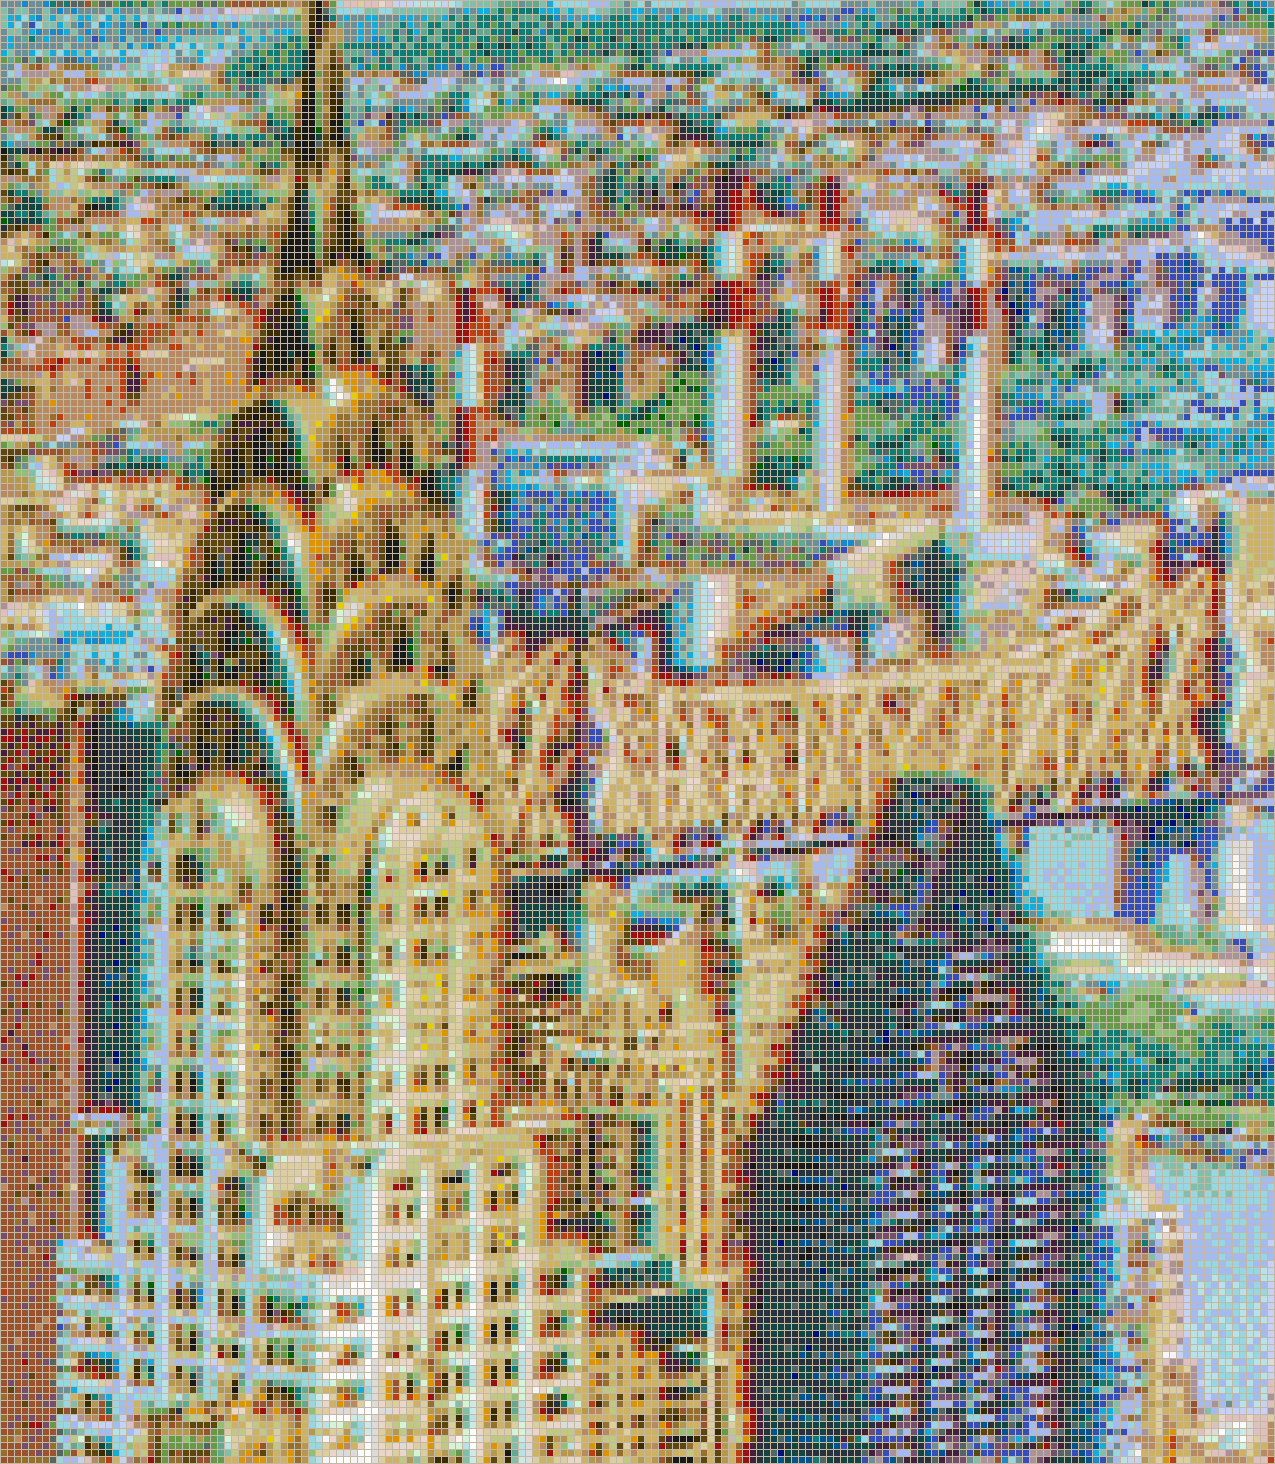 Chrysler Building from the Empire State - Mosaic Tile Art